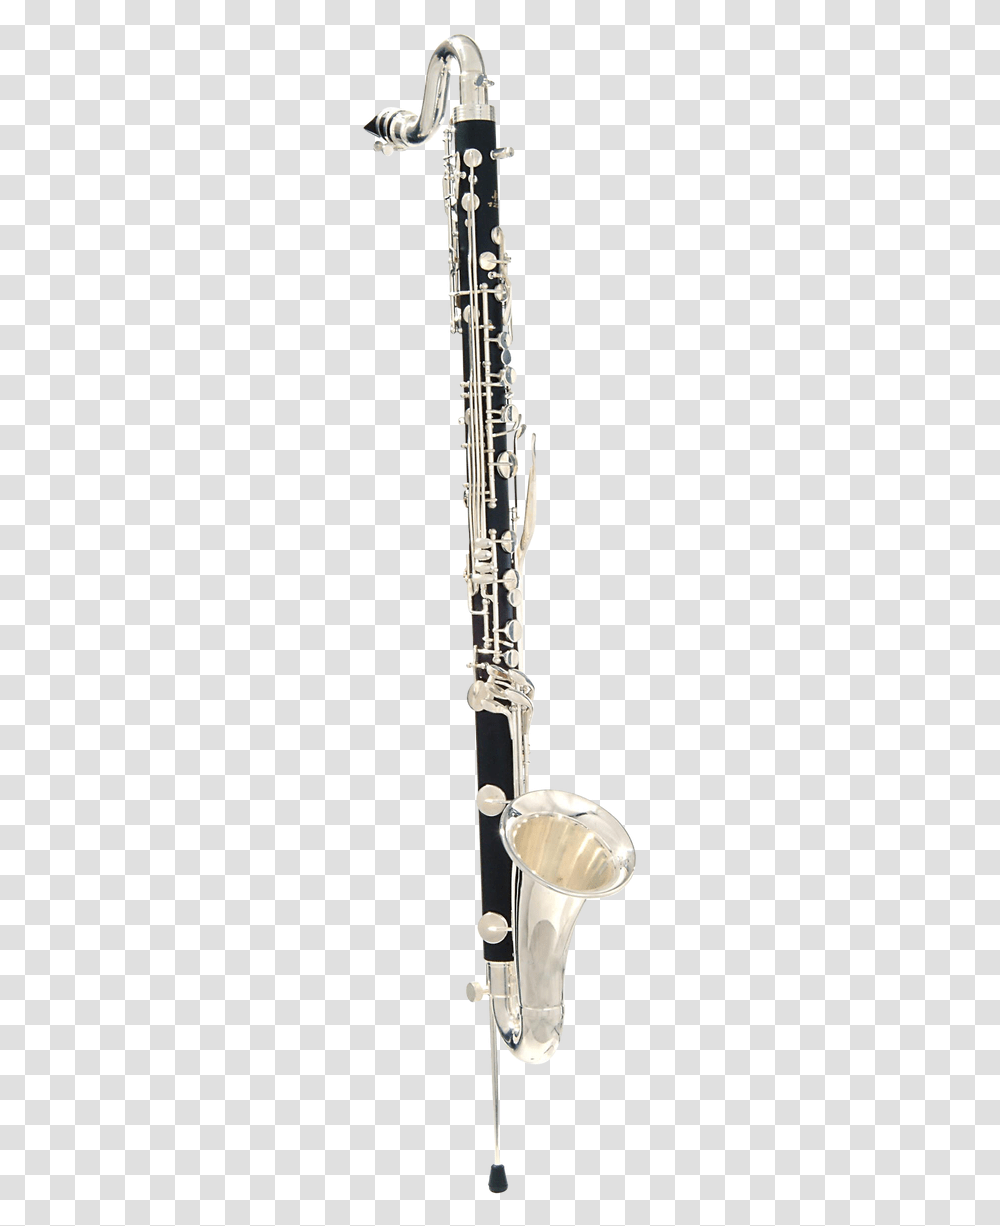 Piccolo Clarinet, Oboe, Musical Instrument, Sword, Blade Transparent Png